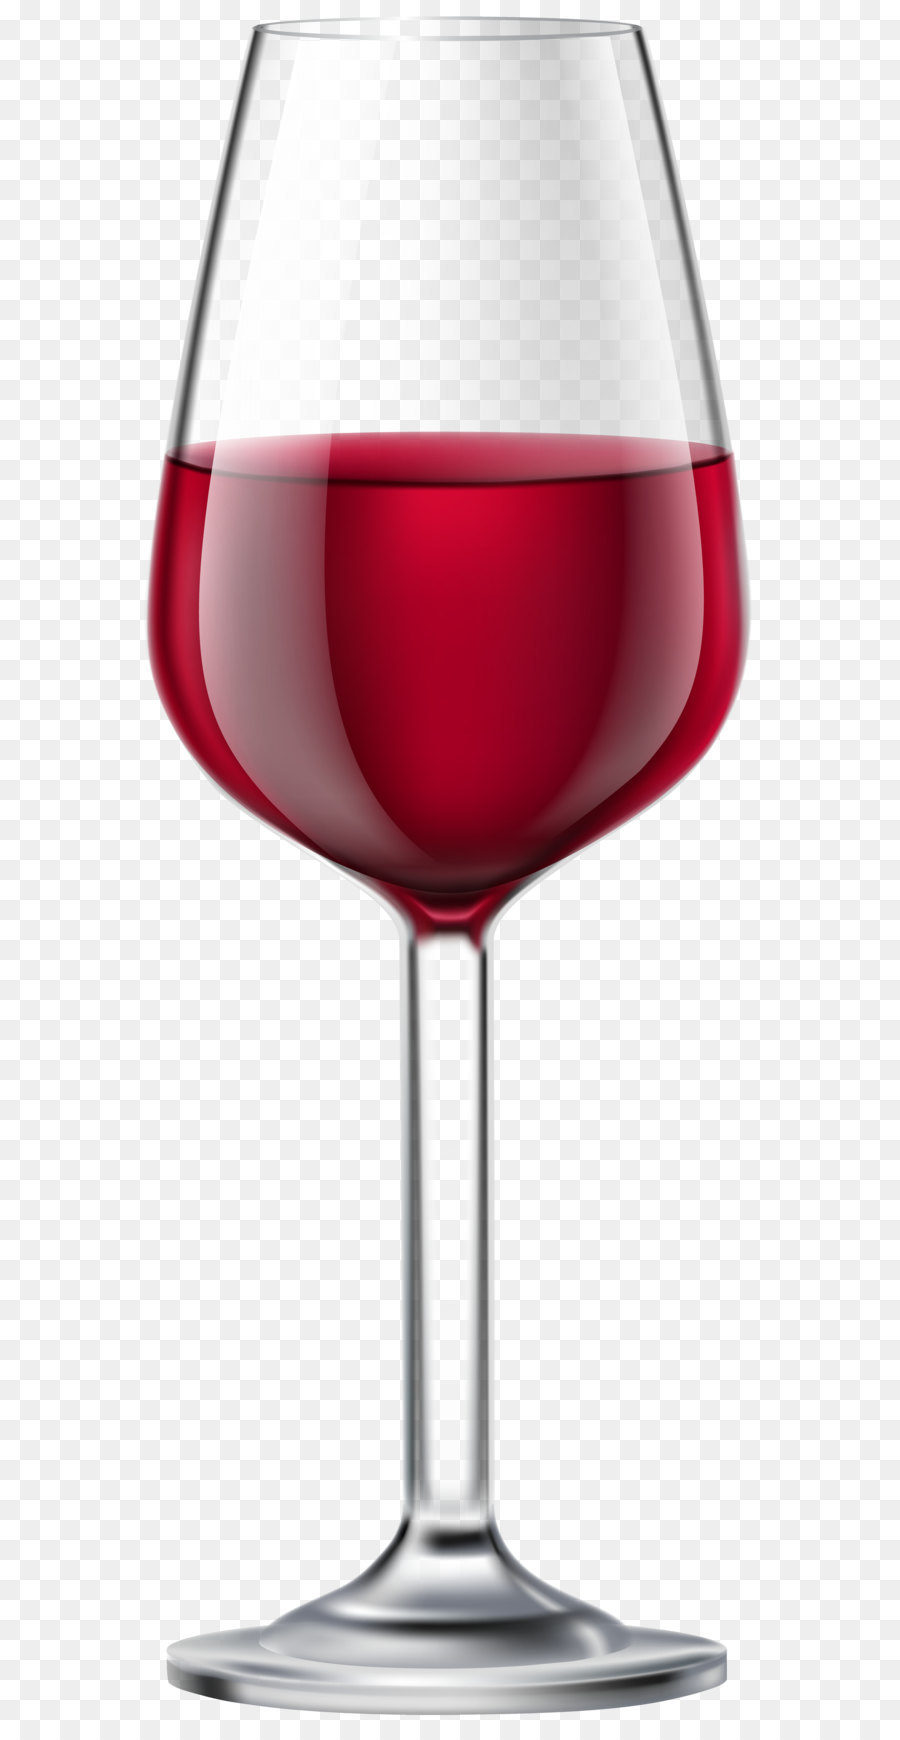 Red Wine Wine glass Cocktail Clip art - Glass of Red Wine Transparent Clip Art PNG Image png download - 3022*8000 - Free Transparent Red Wine png Download.